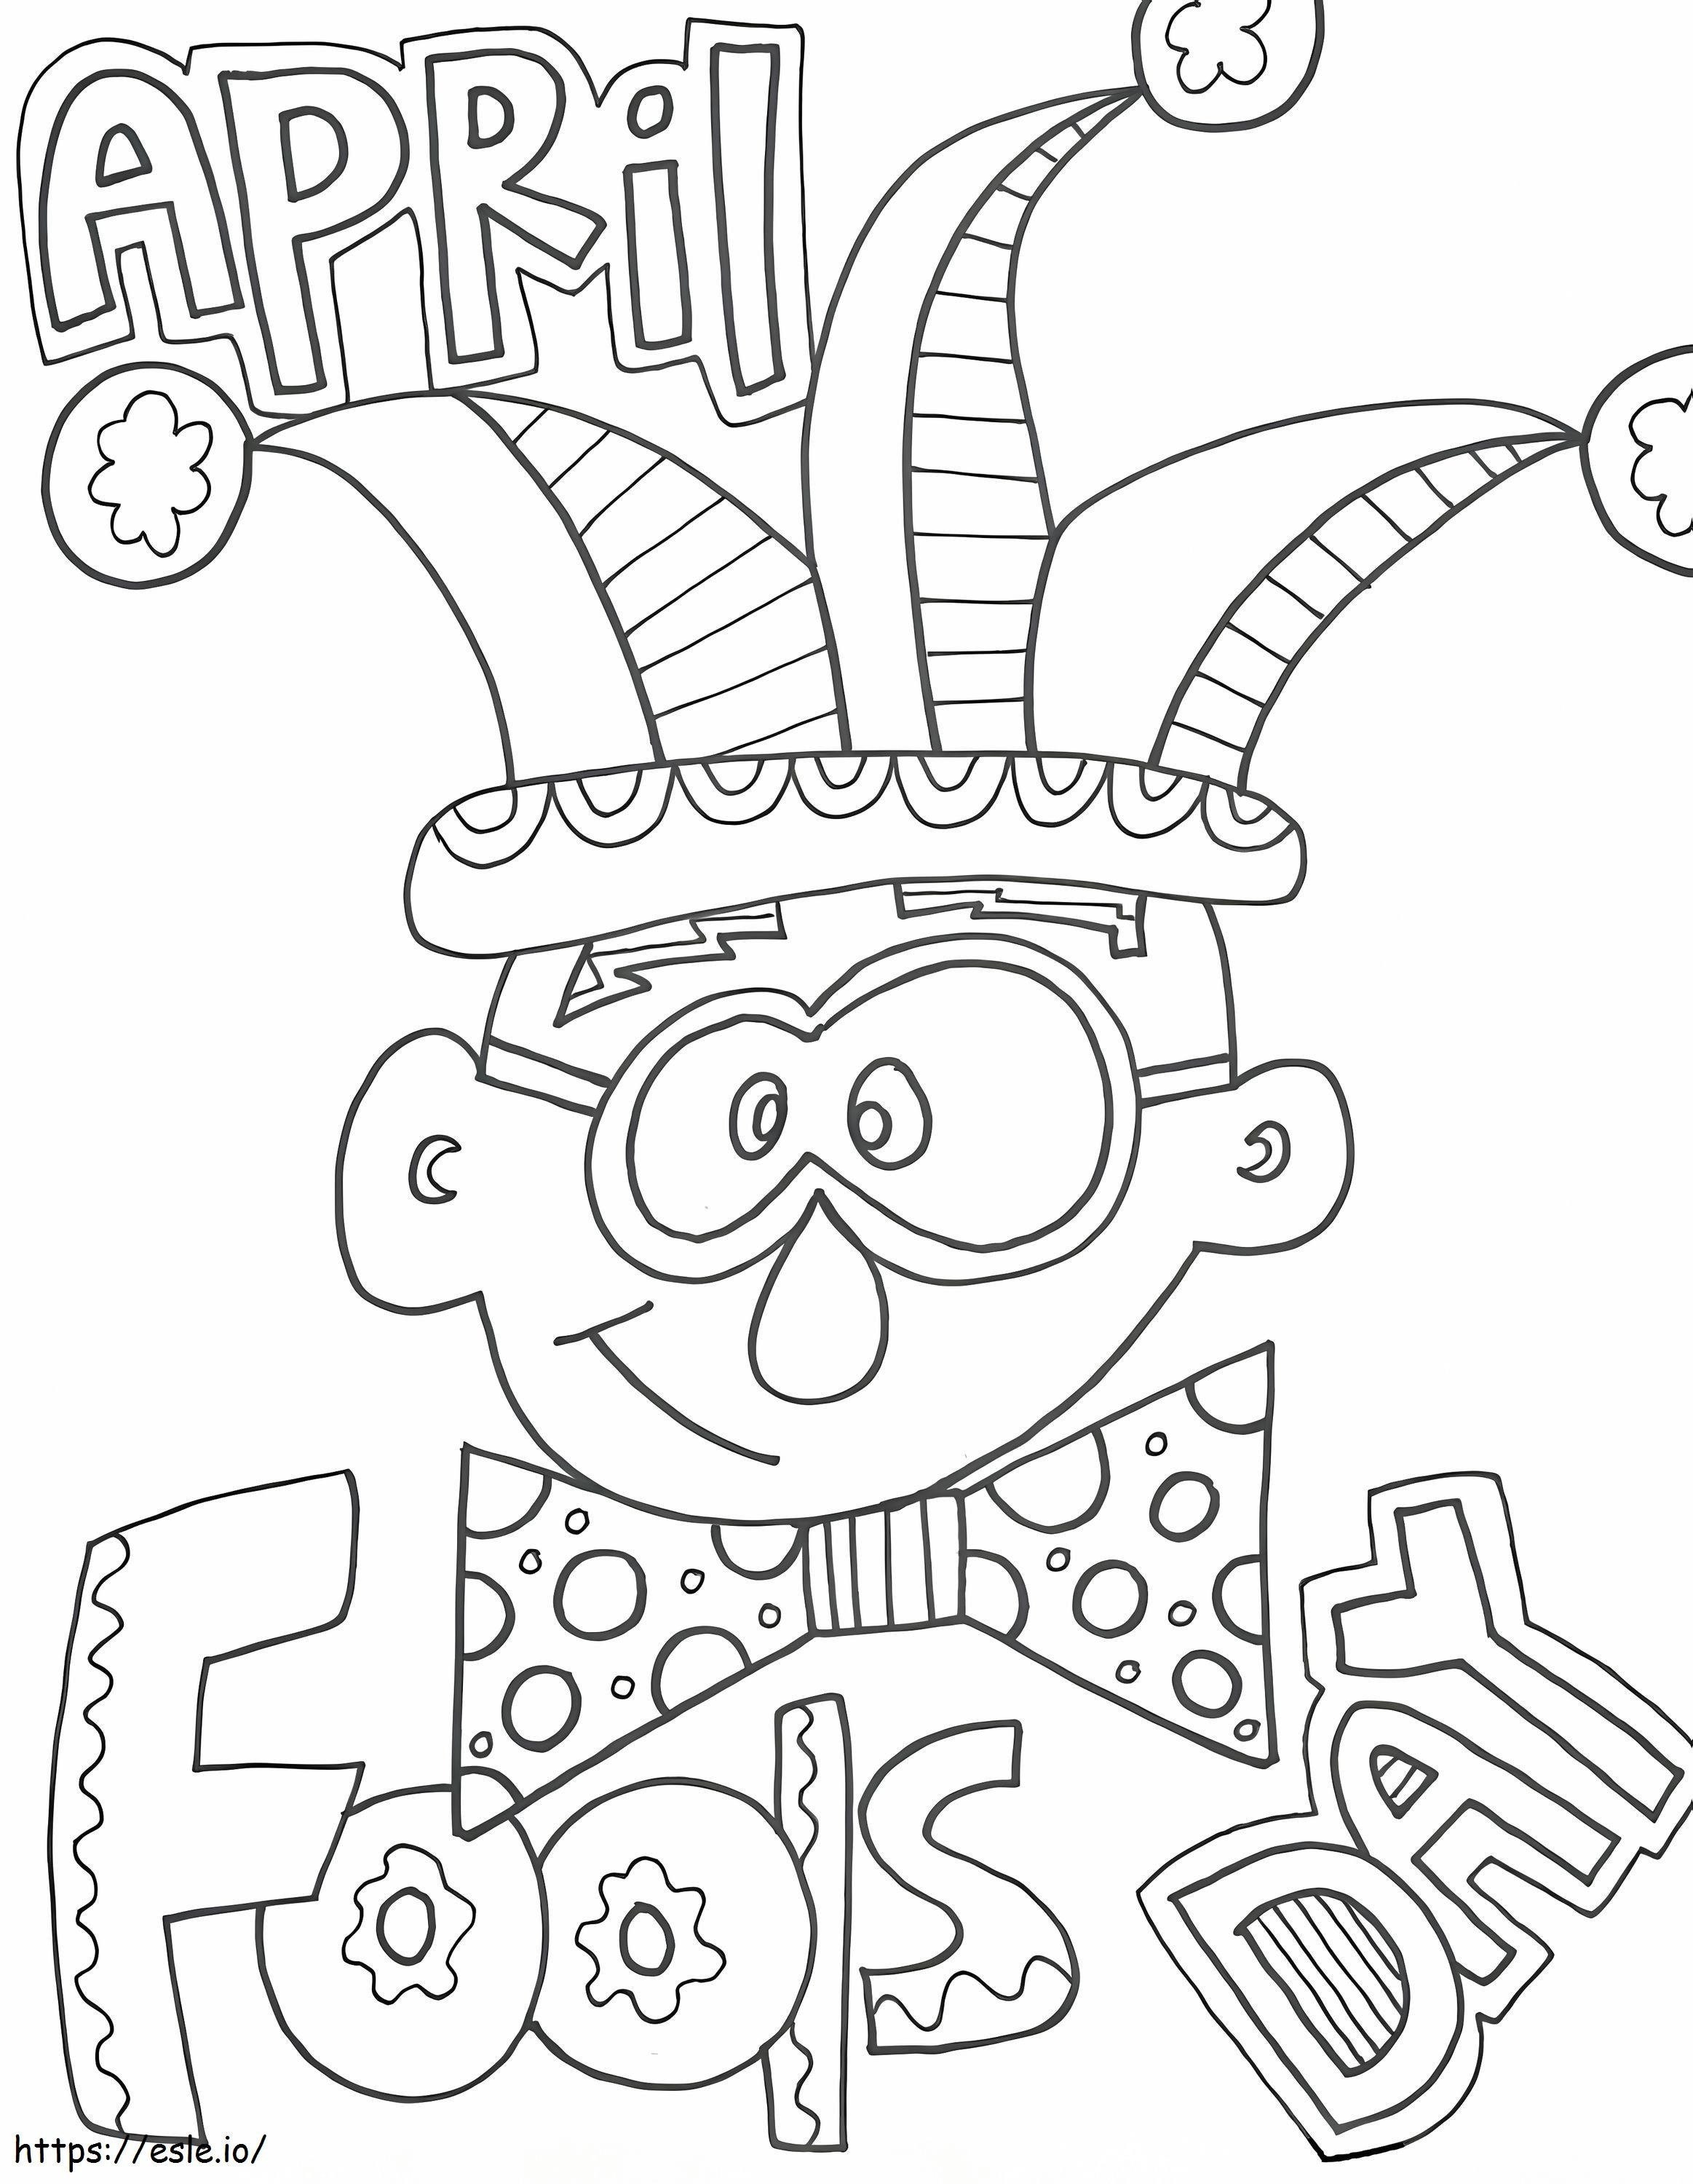 April Fools Day 8 coloring page